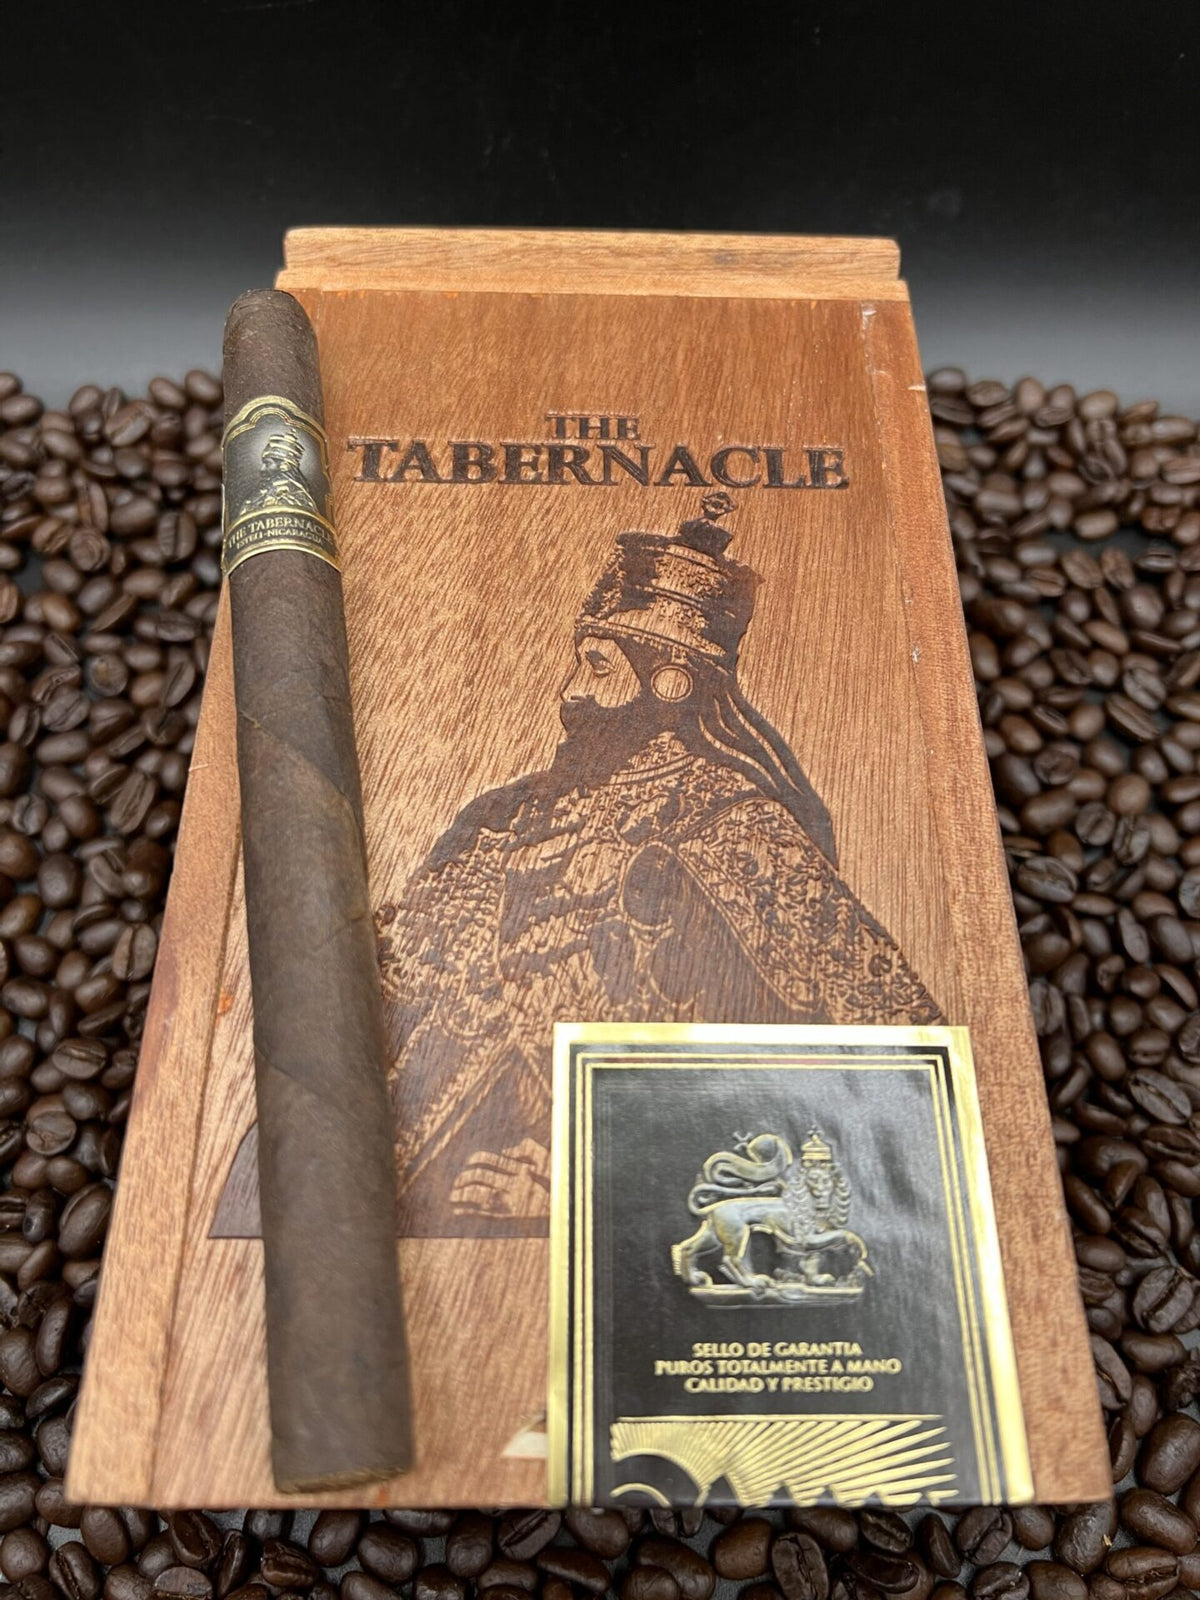 Foundation Cigars - Tabernacle Lancero cigars supplied by Sir Louis Cigars